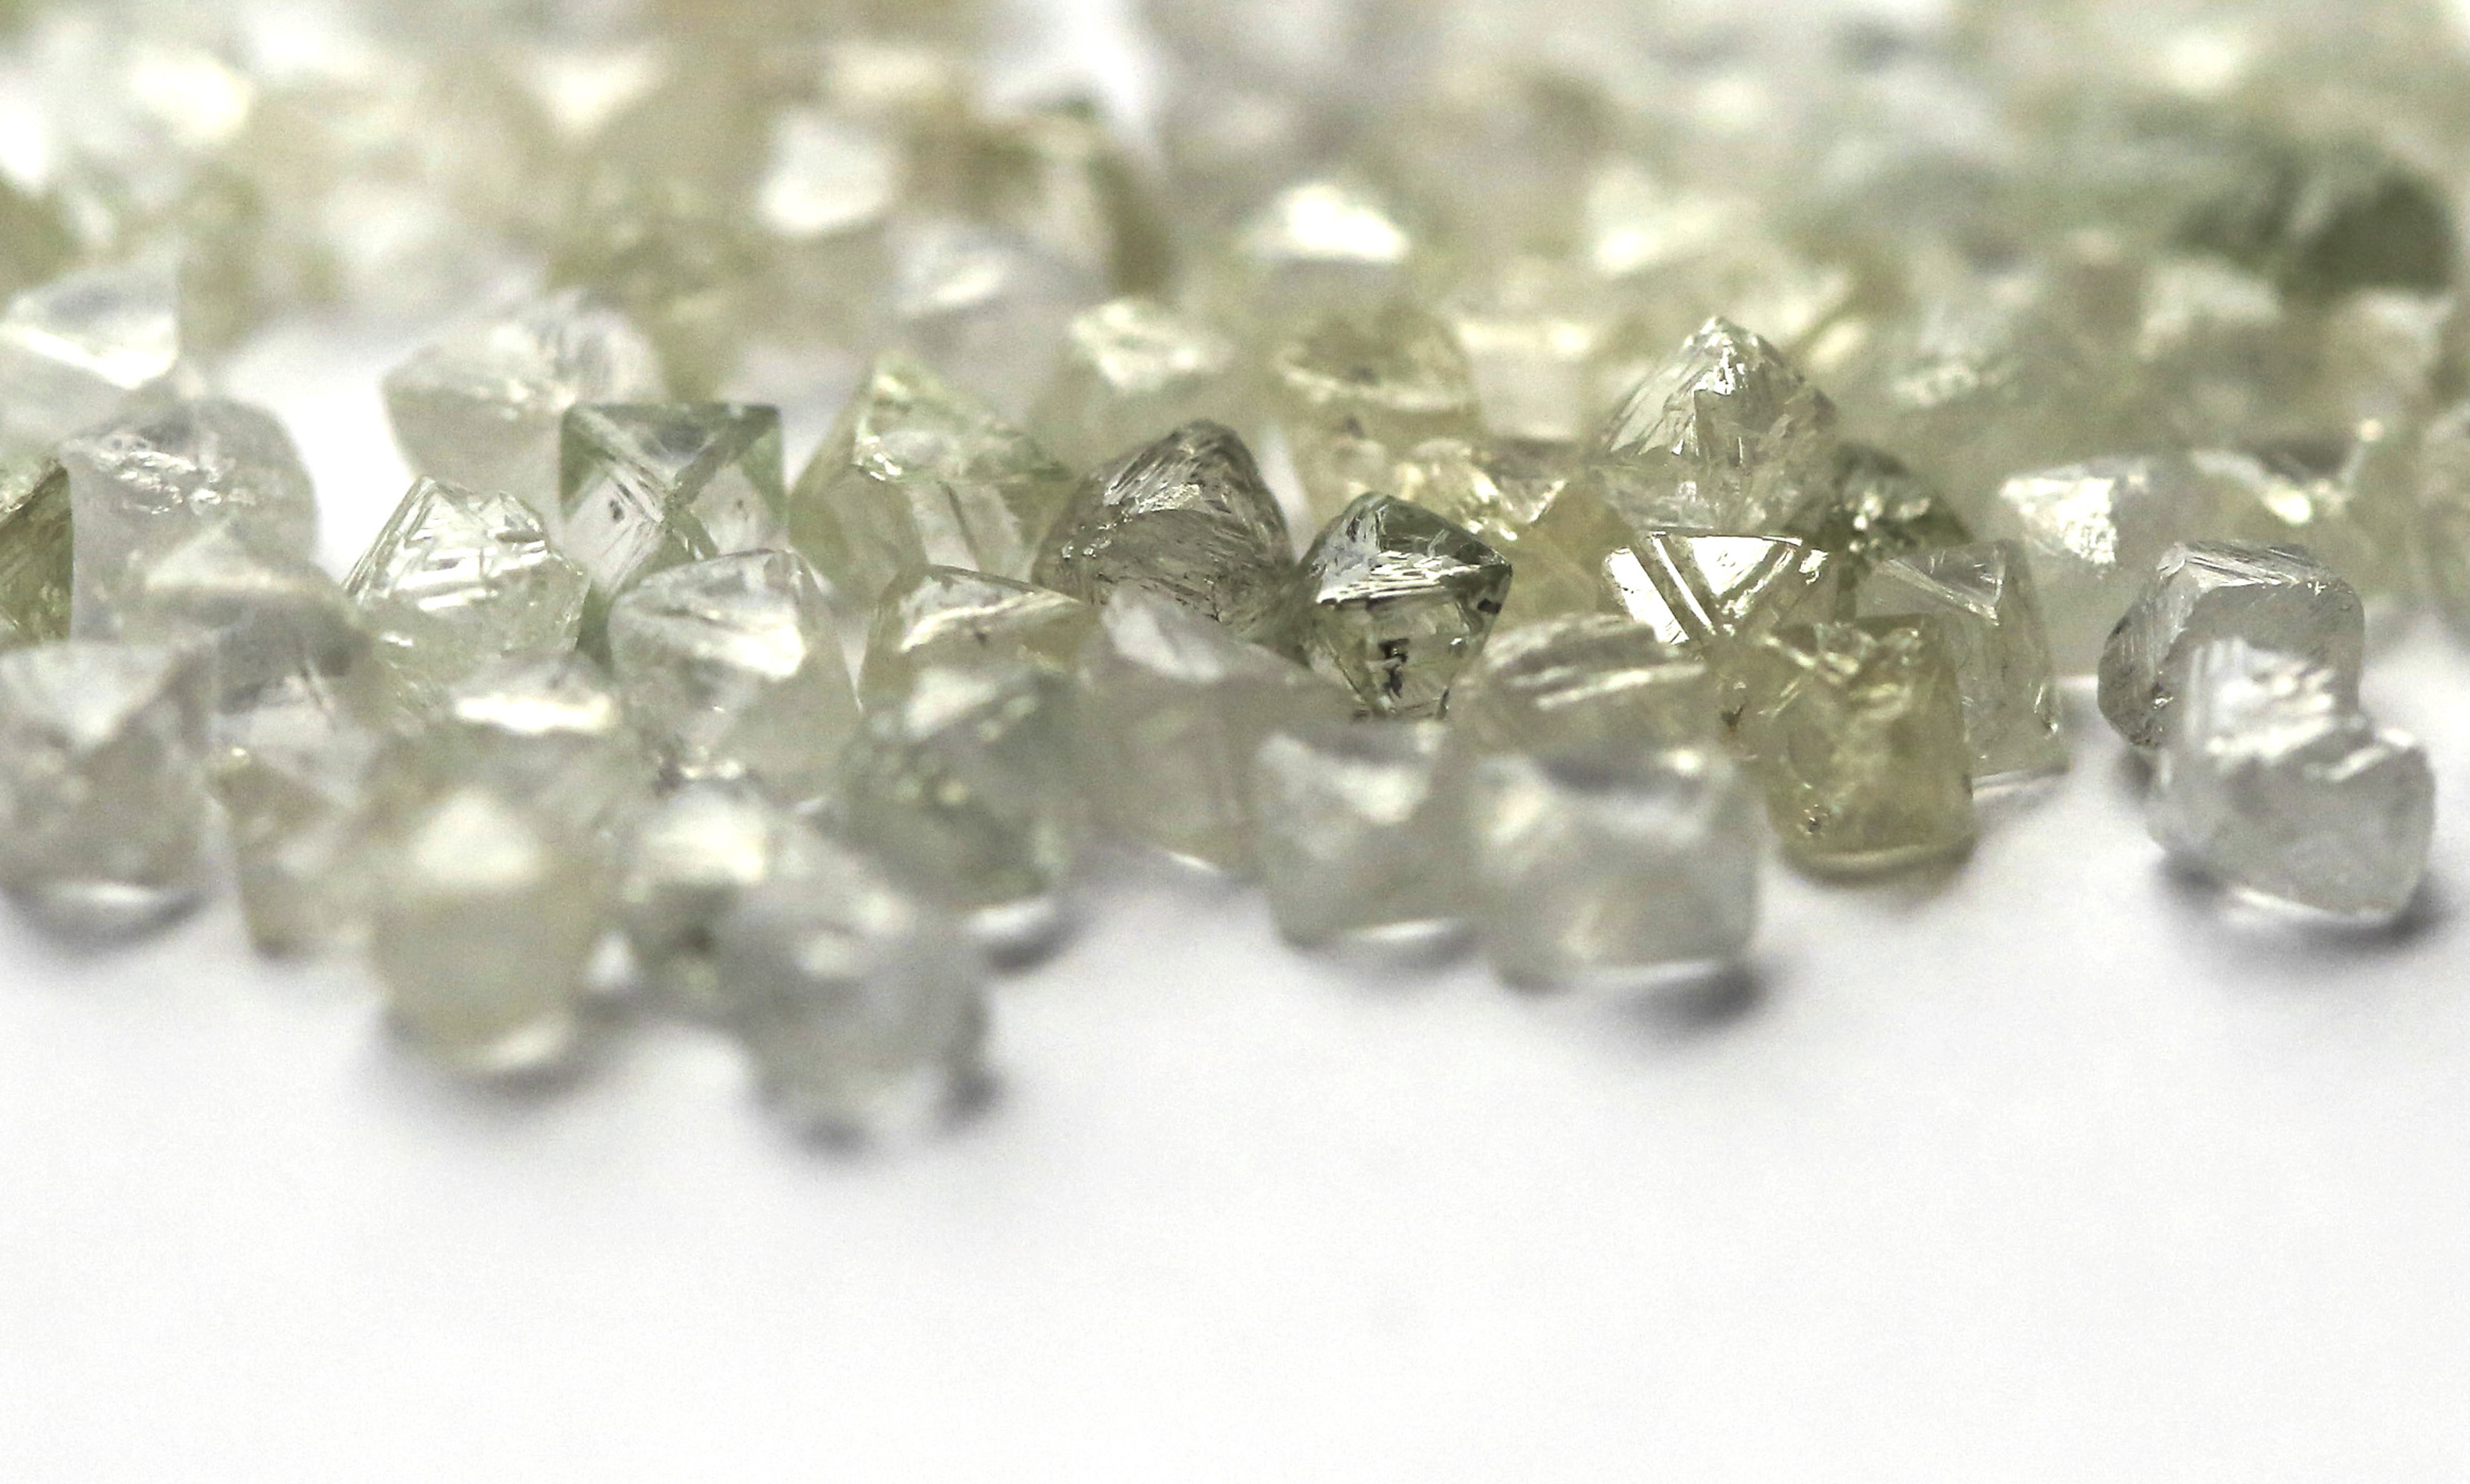 De Beers Seeks A Return to the U.S., Moves Diamond Operations To